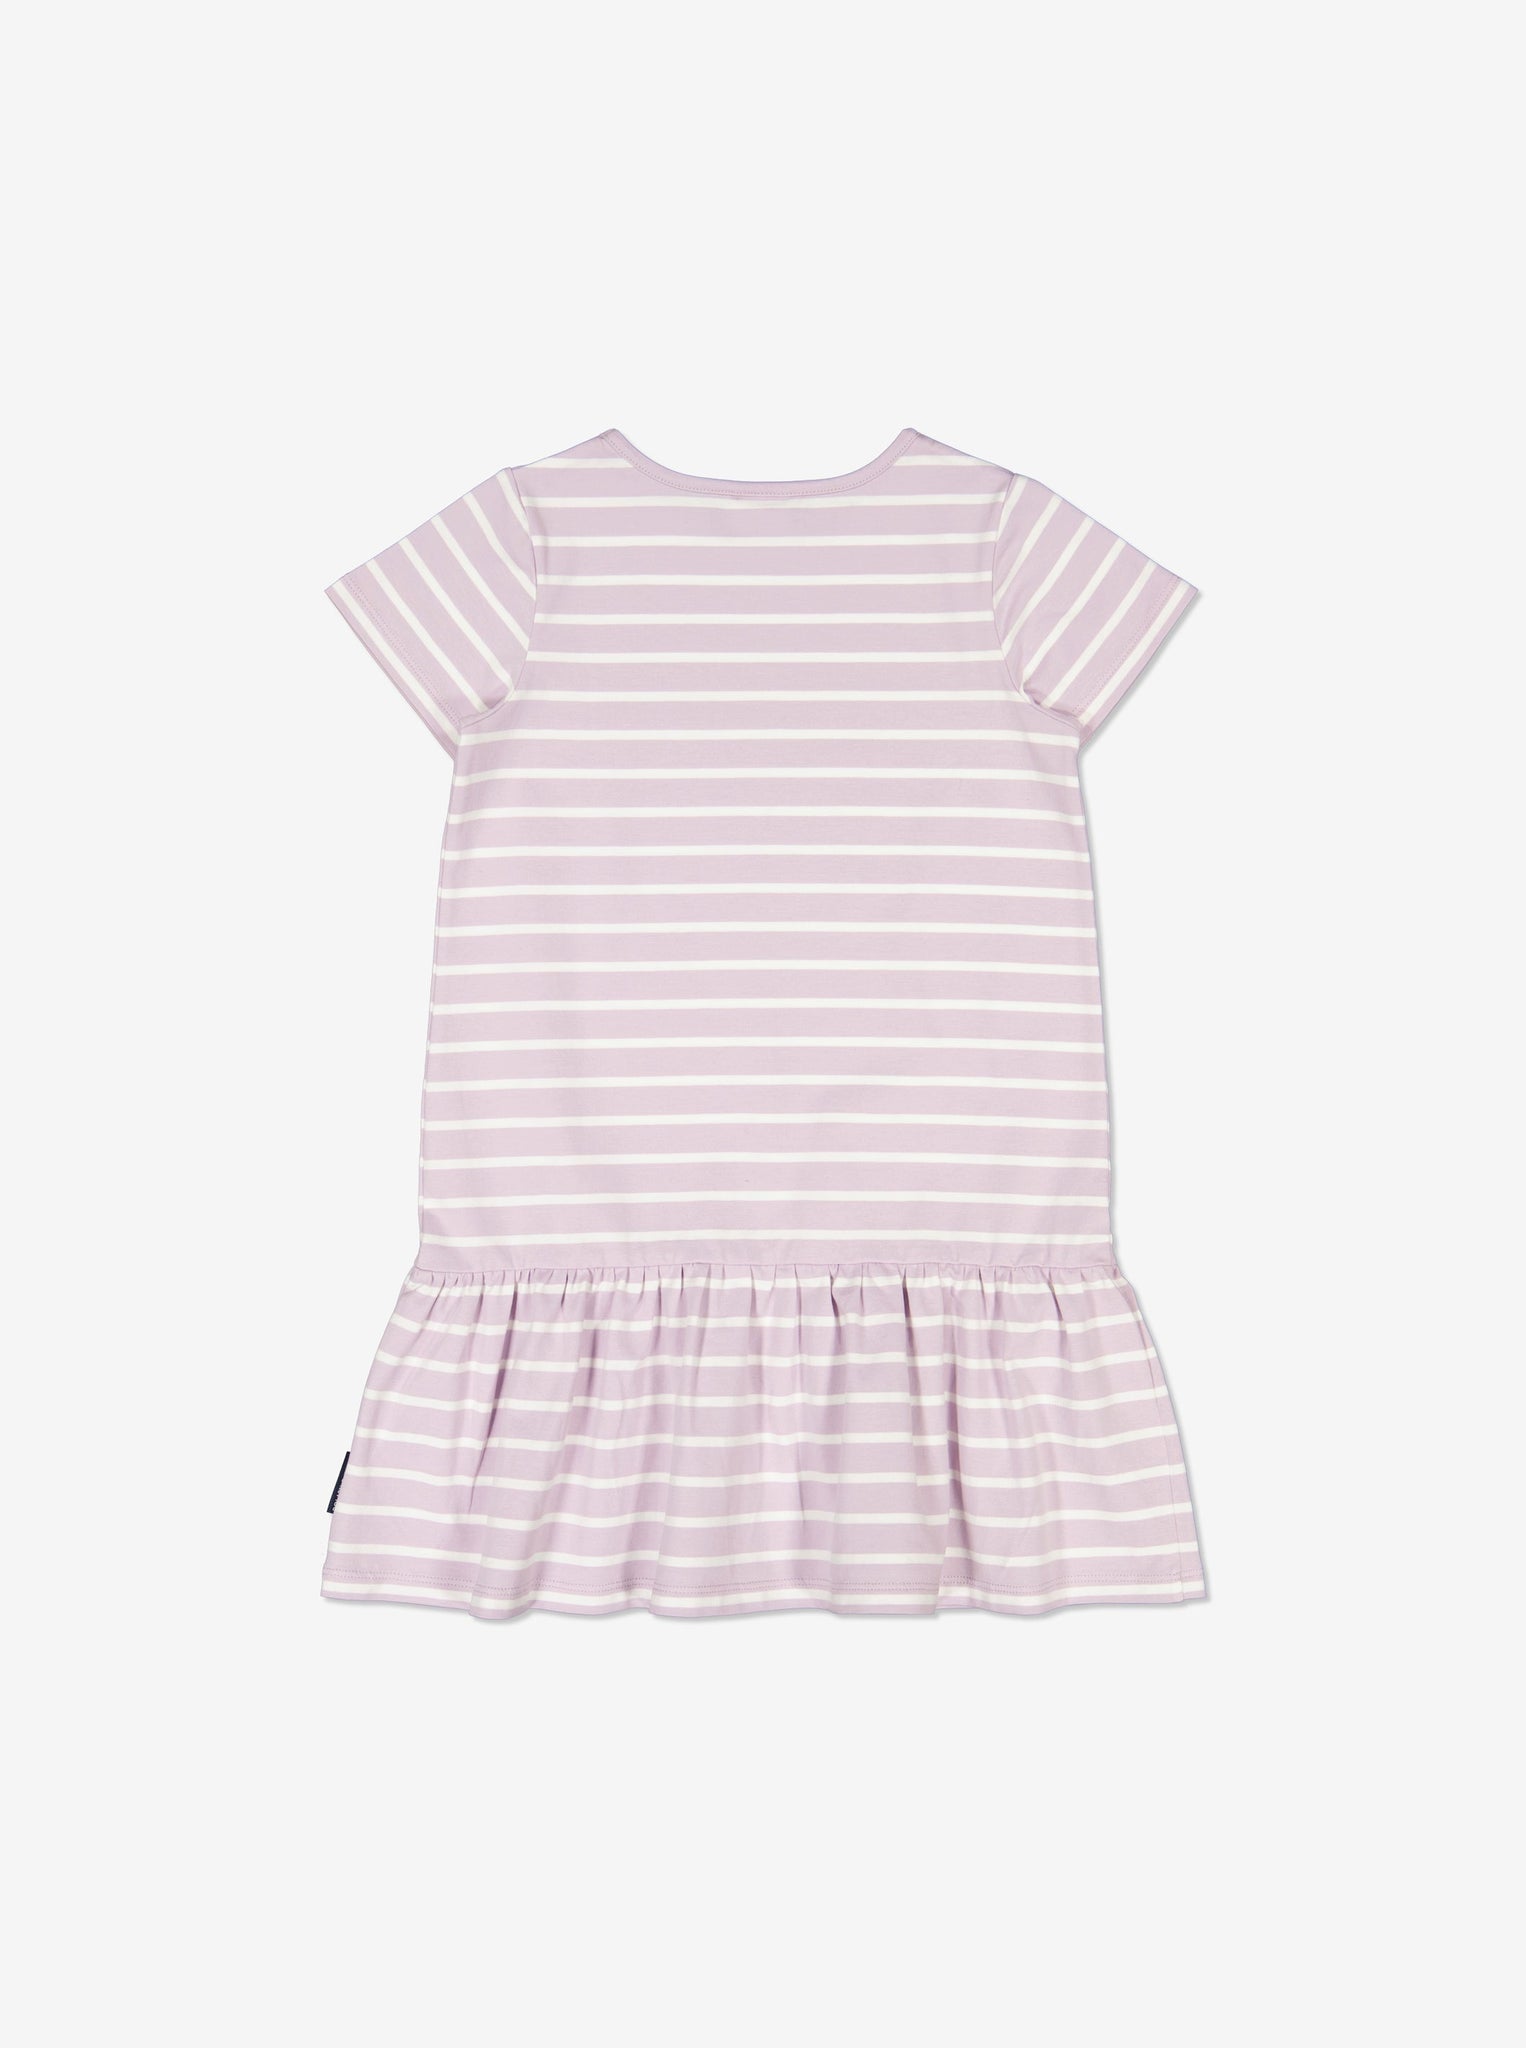 Organic Cotton Pink Girls Dress from Polarn O. Pyret Kidswear. Made from ethically sourced materials.